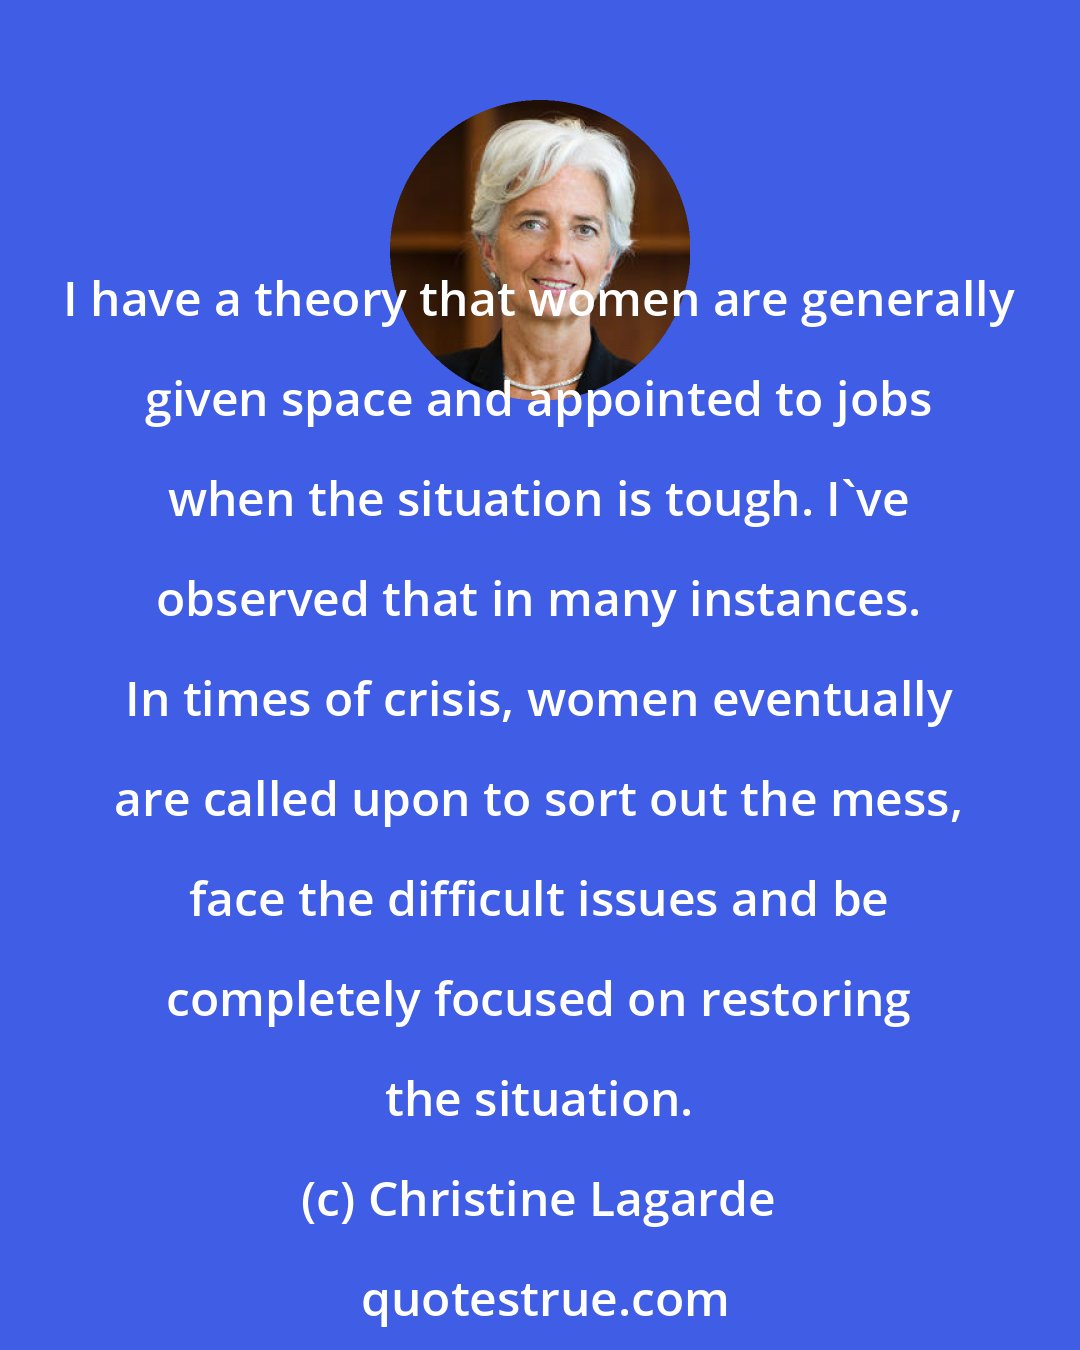 Christine Lagarde: I have a theory that women are generally given space and appointed to jobs when the situation is tough. I've observed that in many instances. In times of crisis, women eventually are called upon to sort out the mess, face the difficult issues and be completely focused on restoring the situation.